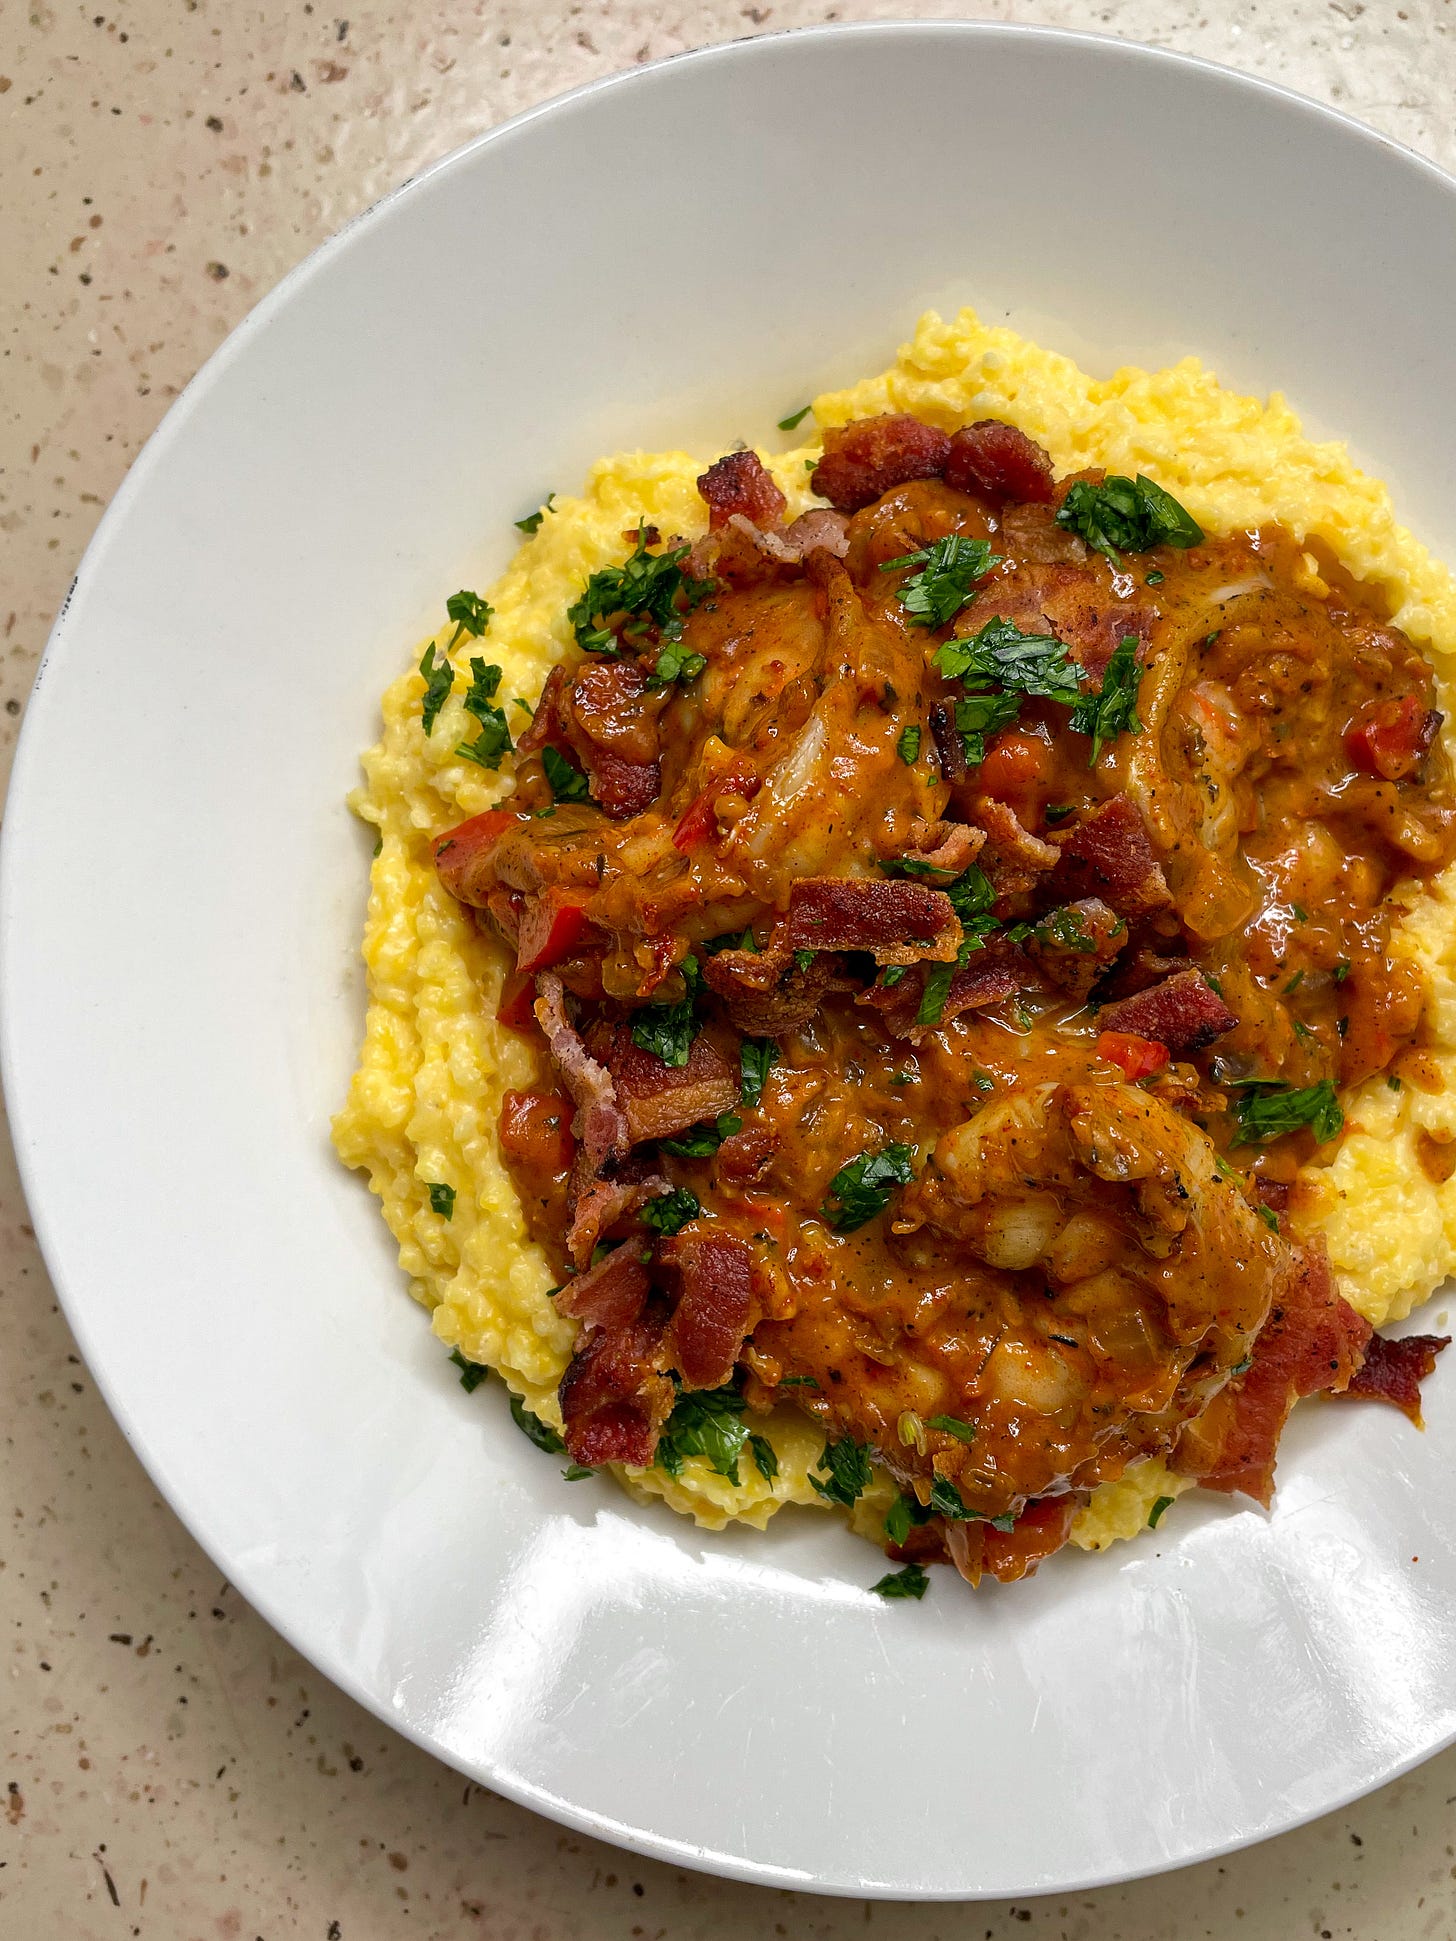 A big bowl of cheesy grits piled high with creamy, Cajun-spiced shrimp, crumbled bacon and parsley.